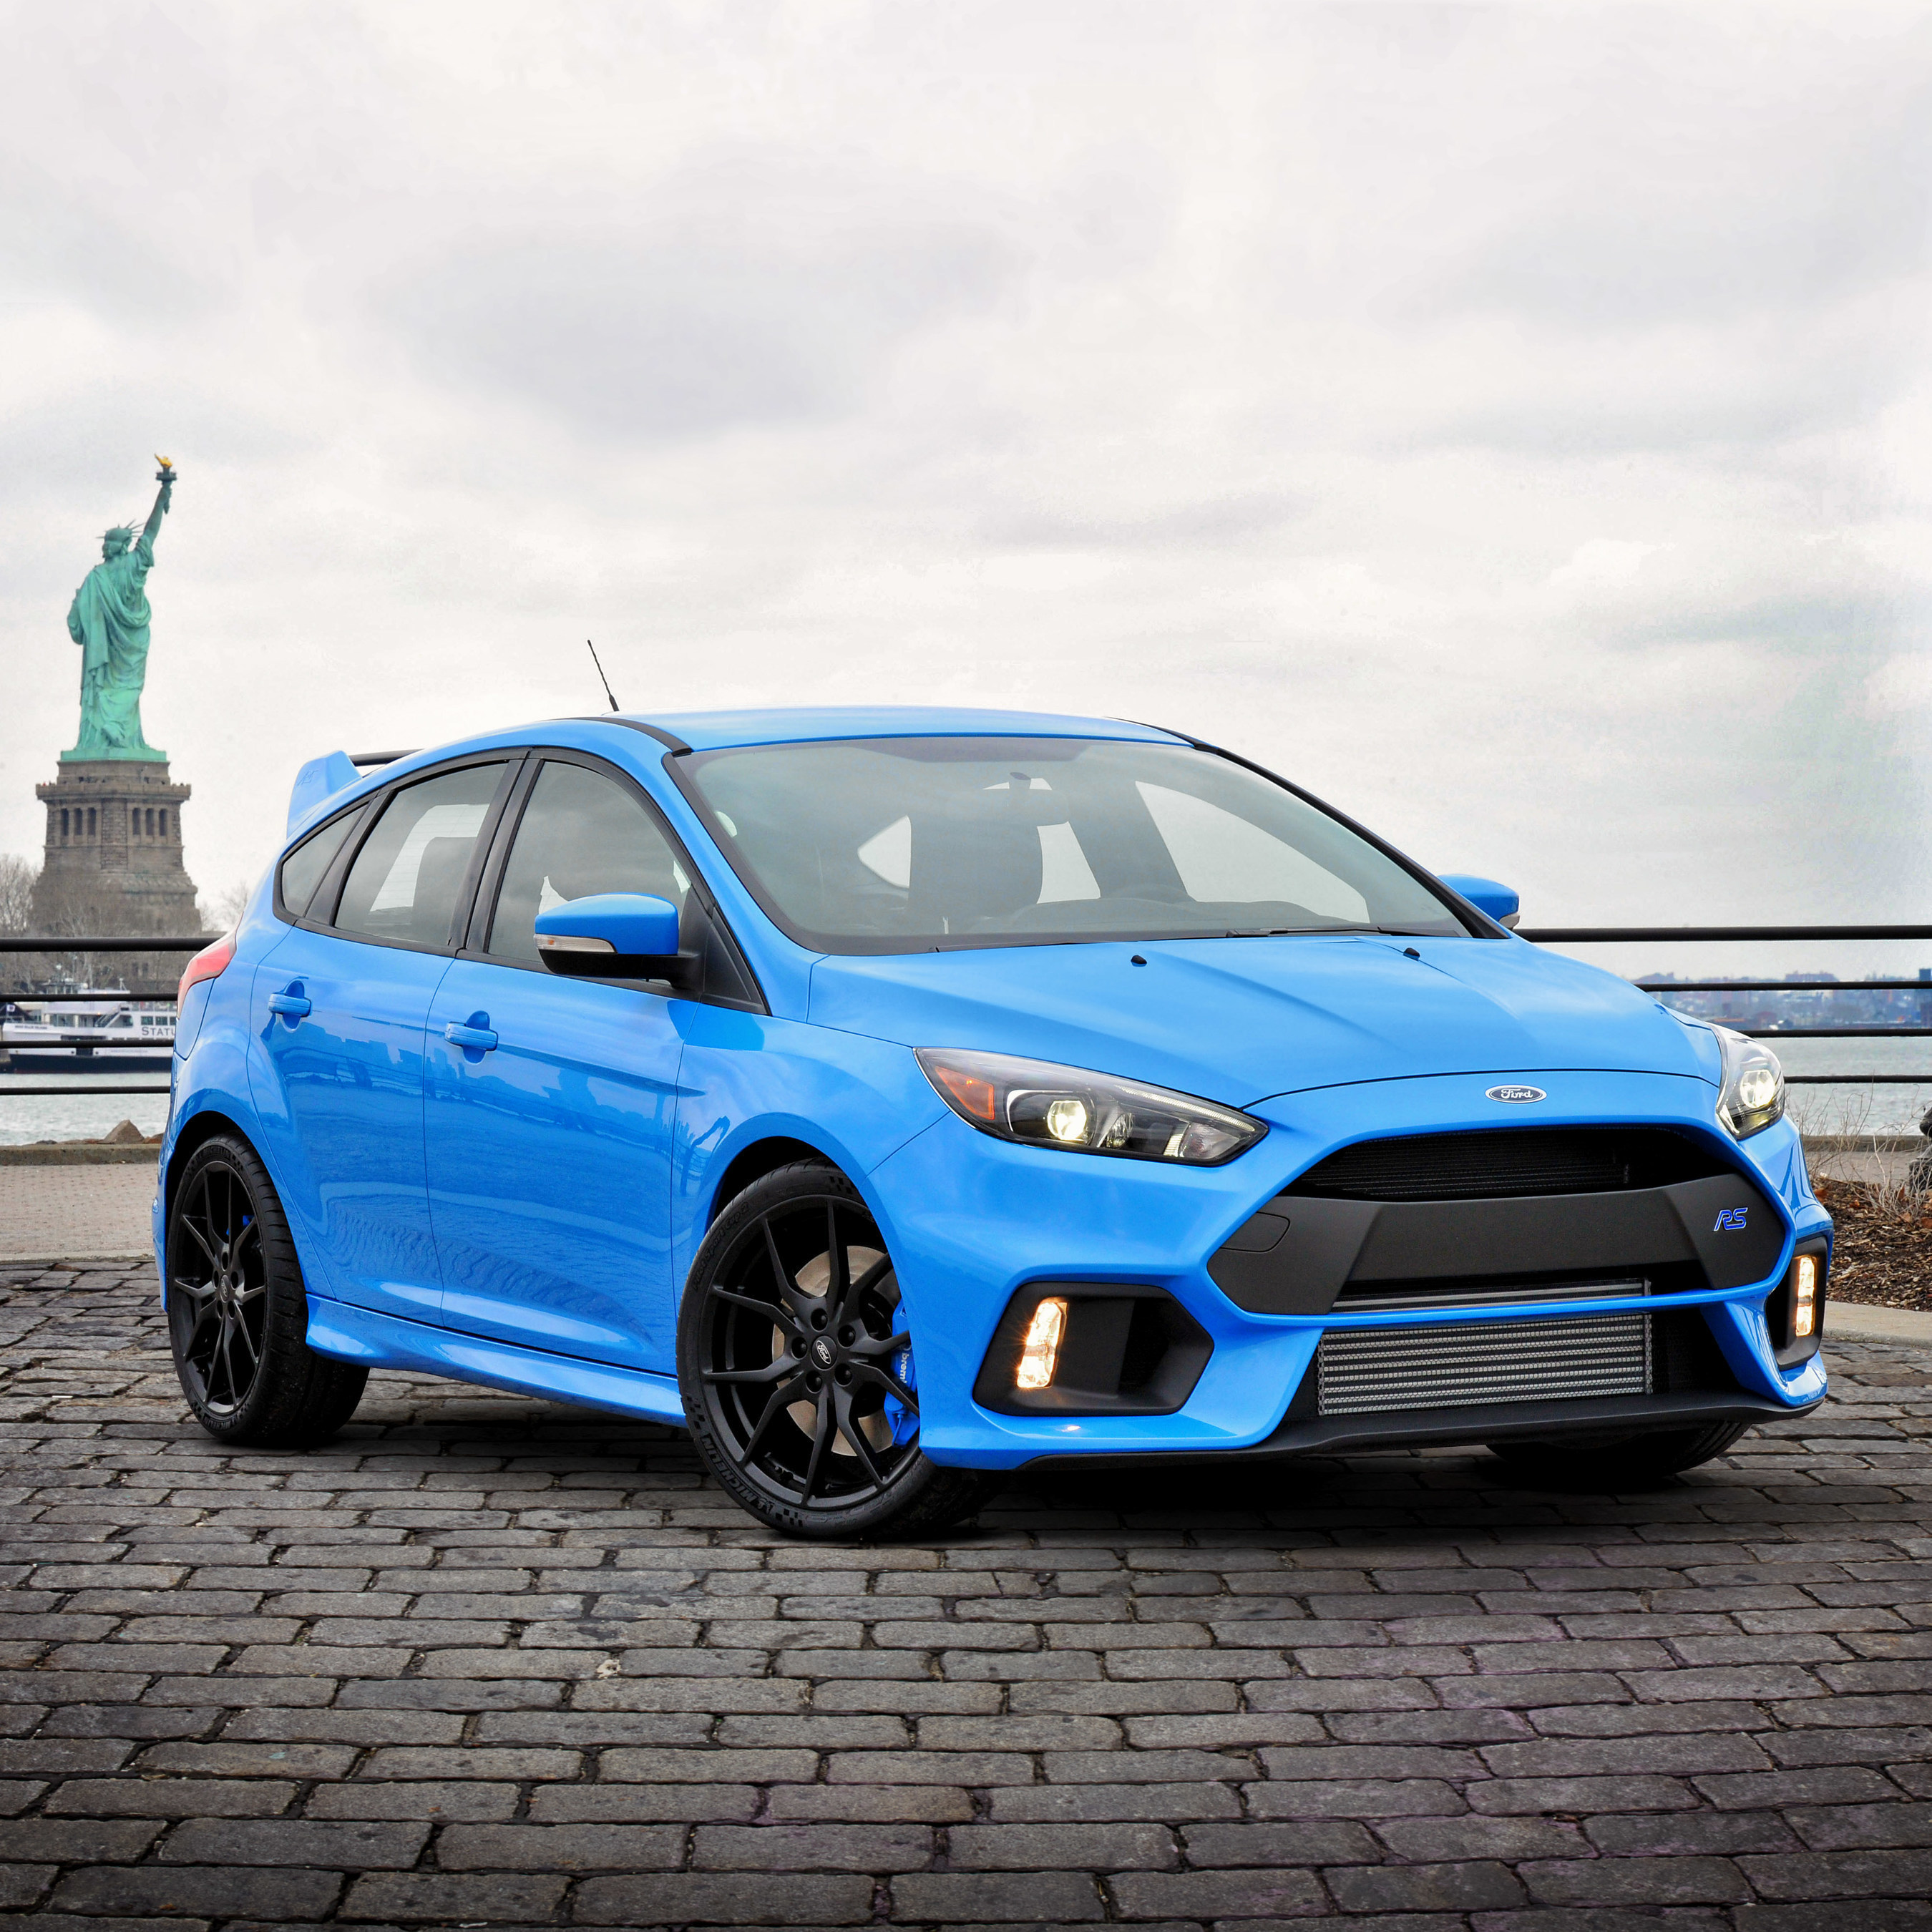 The new Ford Focus RS has a tire story that is unique even for Michelin.